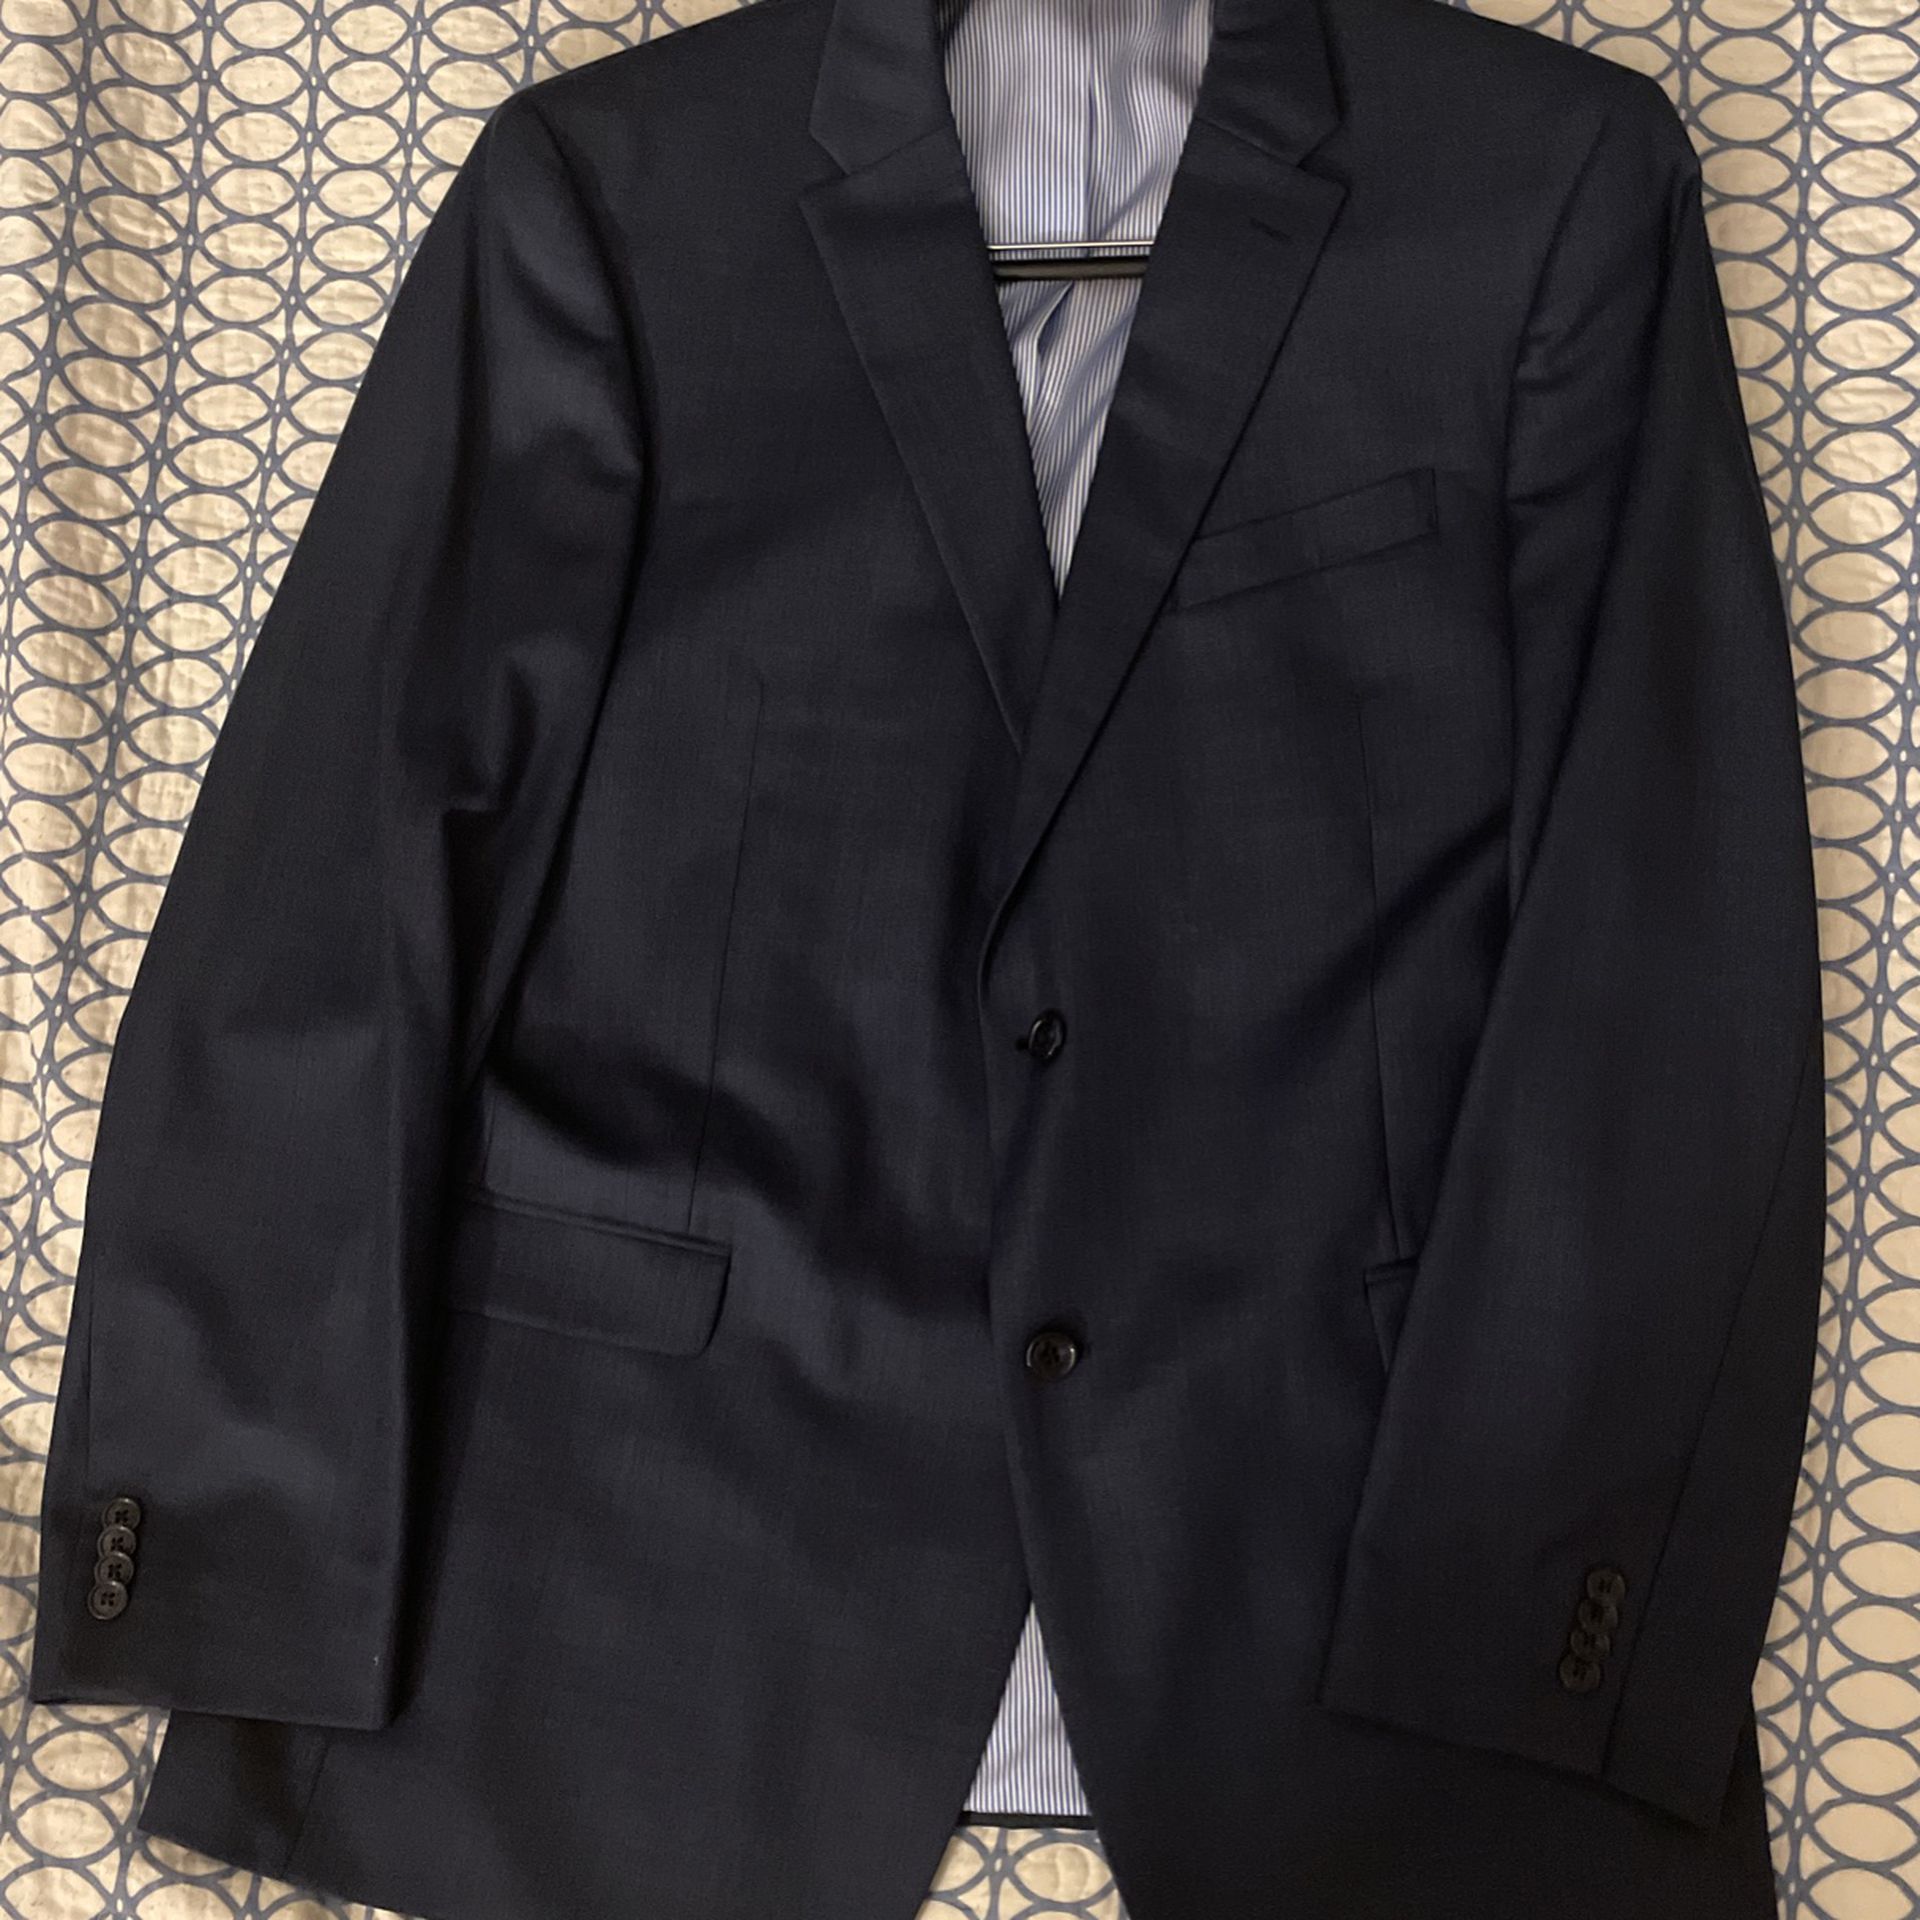 100% Wool Tommy Hilfiger Suit Jacket Navy 